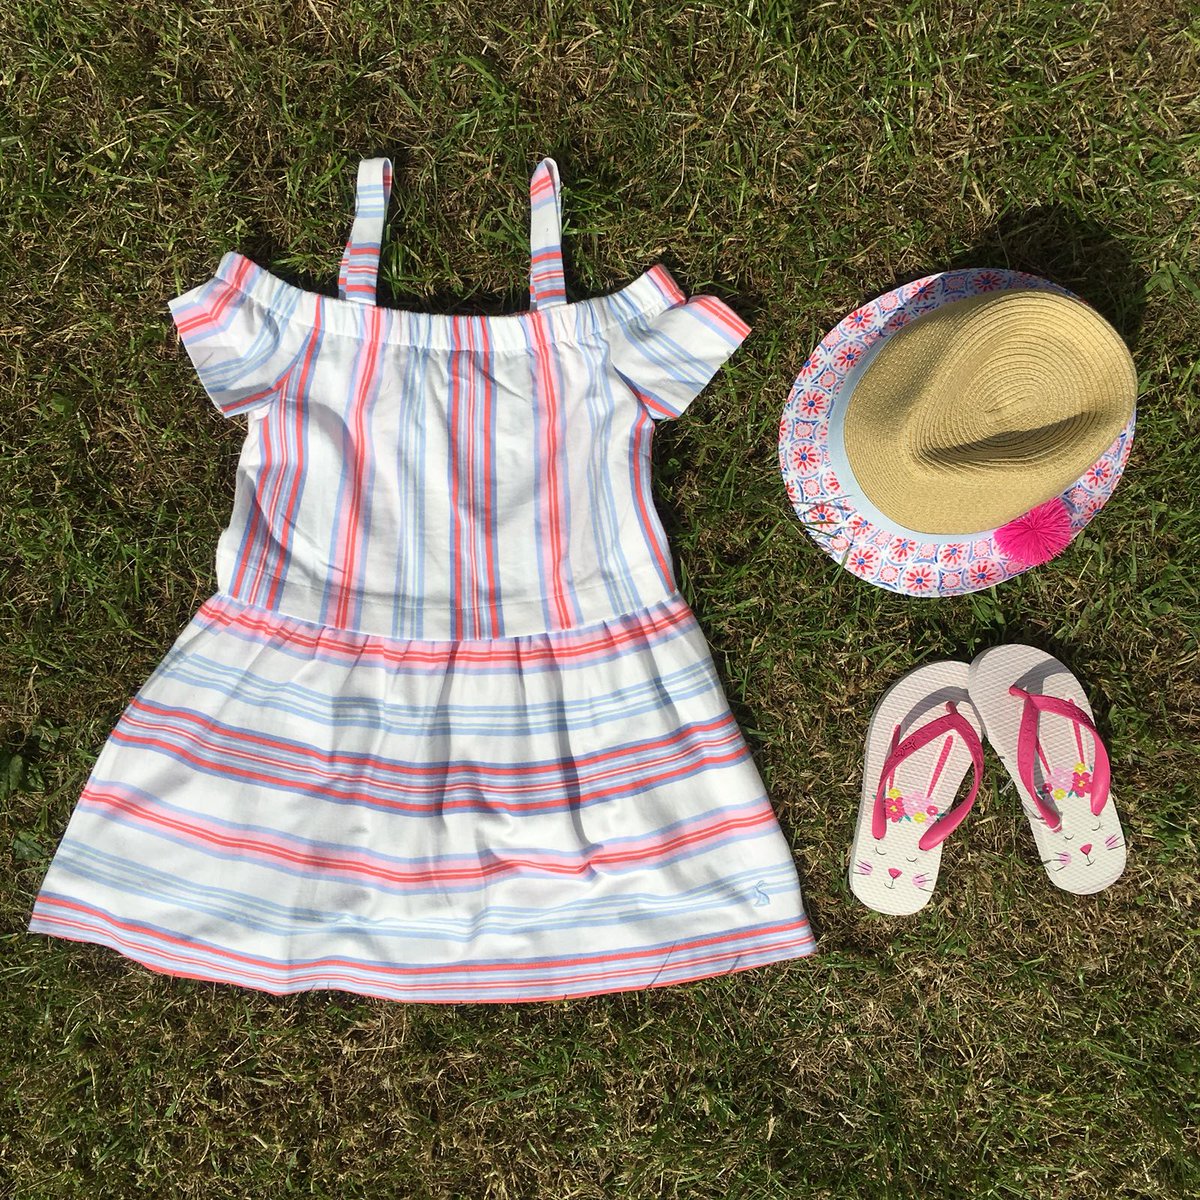 Today’s forecast: Amazing offers and sunshine here at the @SouthEngShows.  Find us at Block 4J by the Blue Gate entrance. 3 for 2 on all kids items....don't miss out!  #Joules #JoulesShows #SouthofEnglandShow #3for2 #AmazingOffers